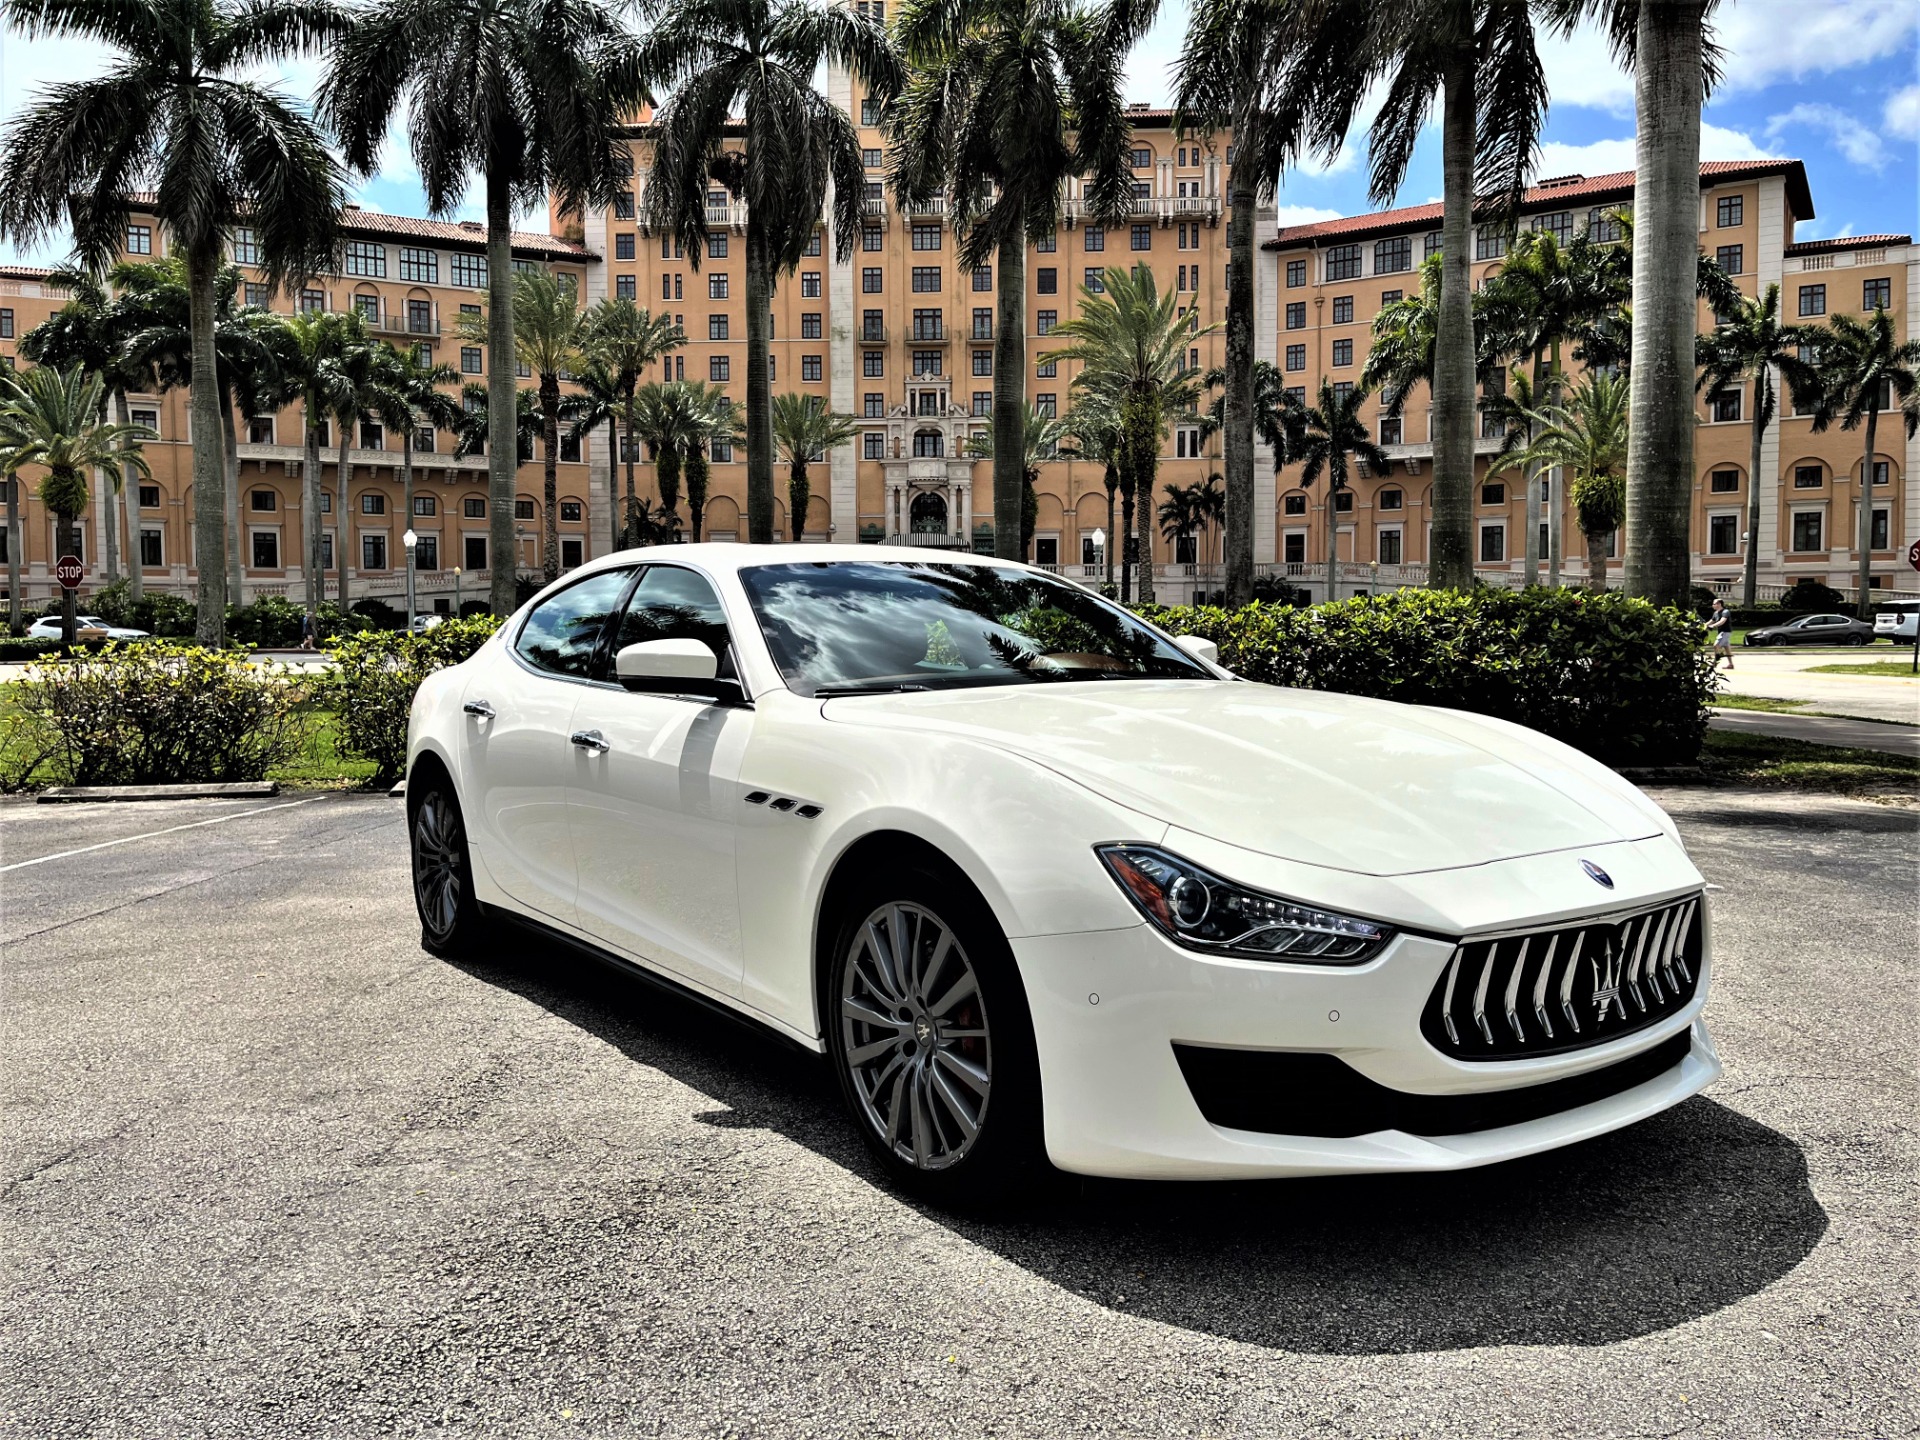 Used 2018 Maserati Ghibli SQ4 for sale Sold at The Gables Sports Cars in Miami FL 33146 1